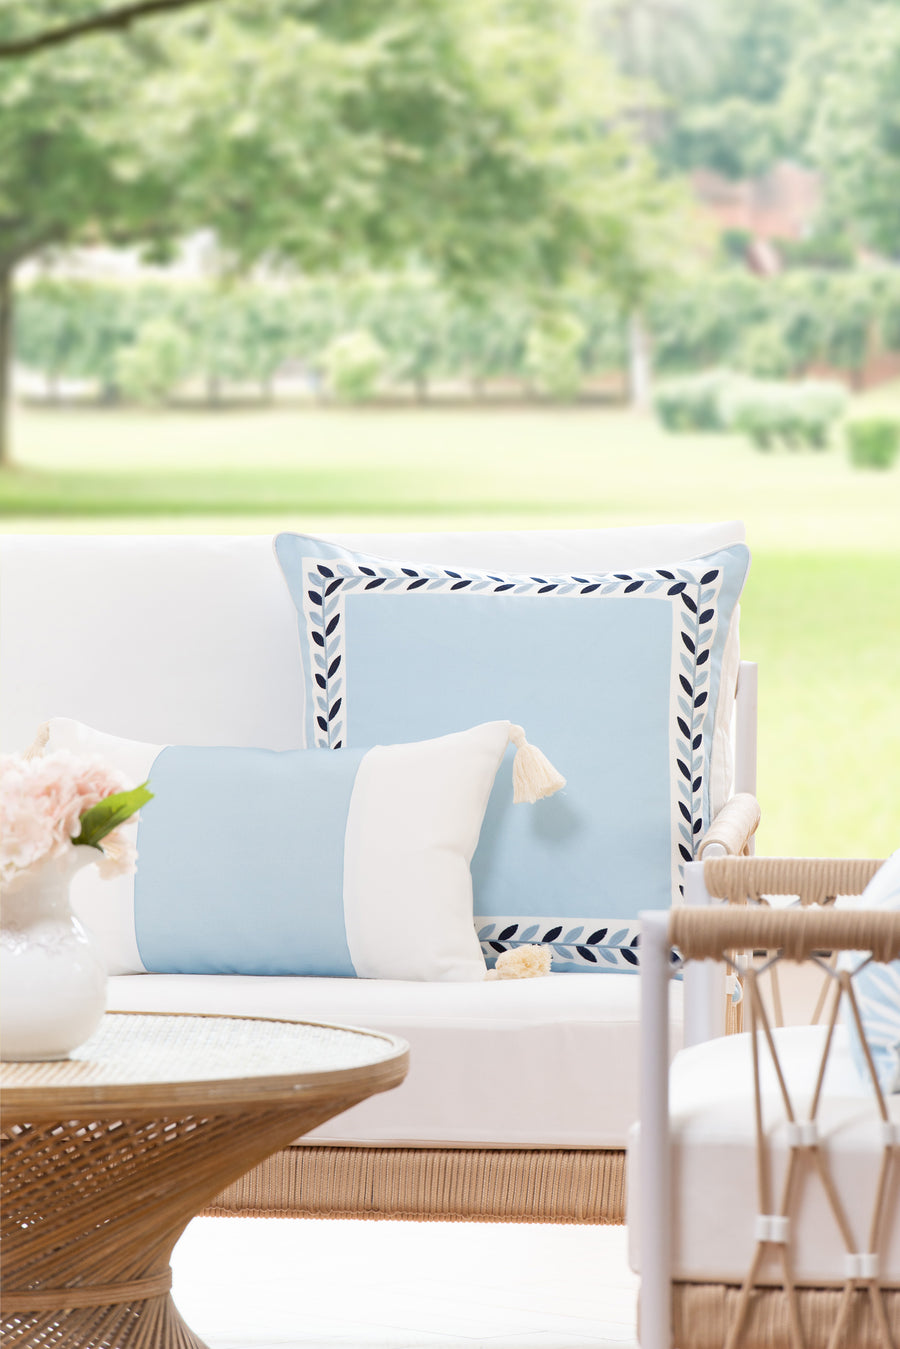 Coastal Indoor Outdoor Lumbar Pillow Cover, Color Block with Tassels, Baby Blue, 12